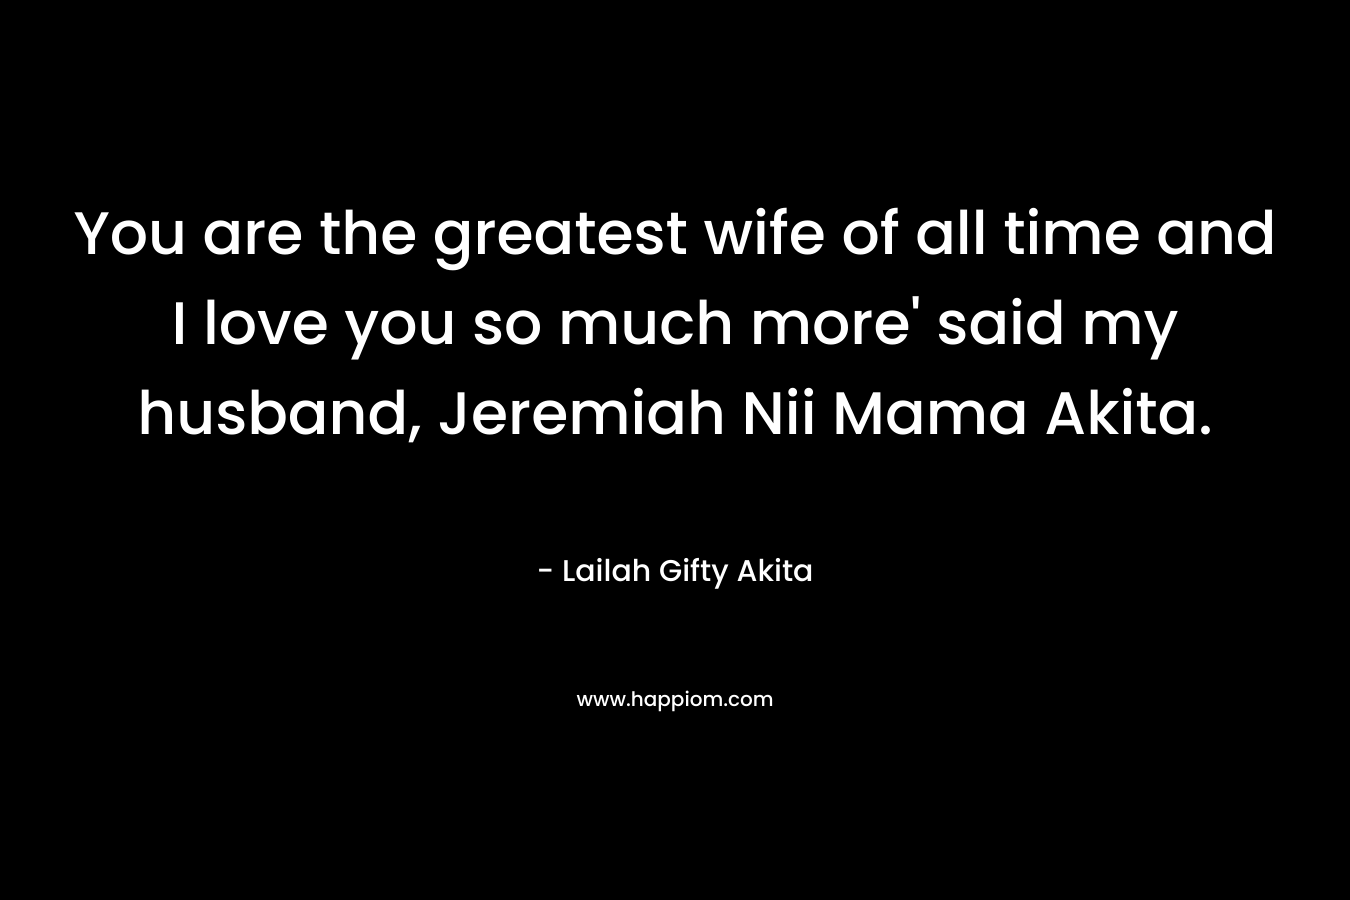 You are the greatest wife of all time and I love you so much more' said my husband, Jeremiah Nii Mama Akita.